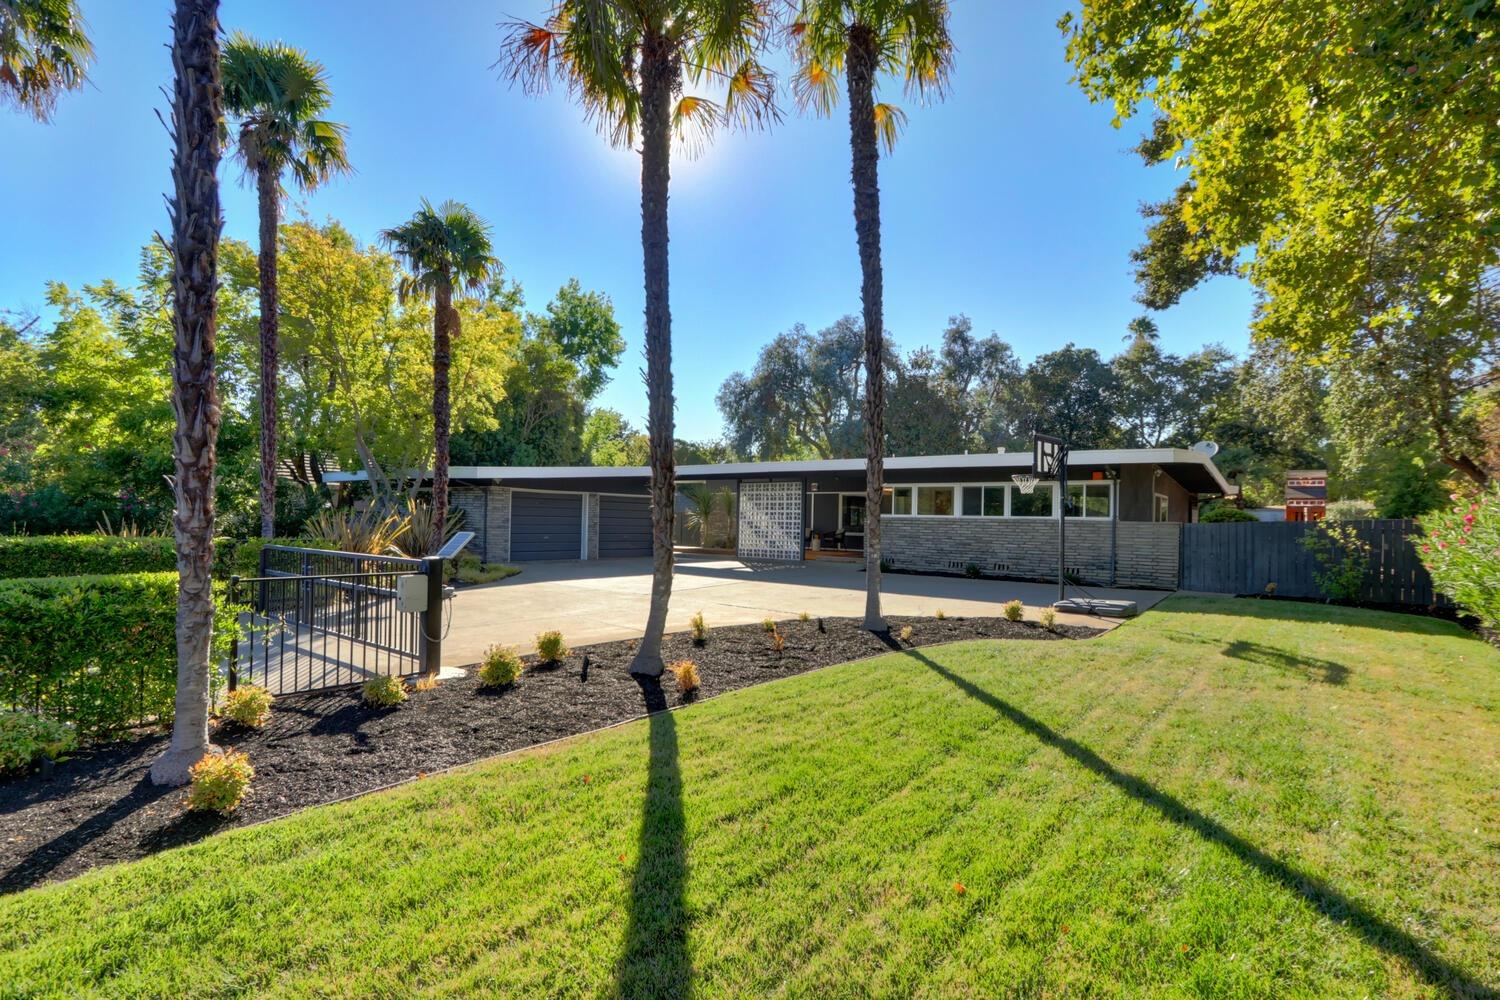 Mid Century Modern, Eichler, Contemporary and Modern homes for sale in Sacramento, Carmichael, Fair Oaks, Davis and the greater metro area